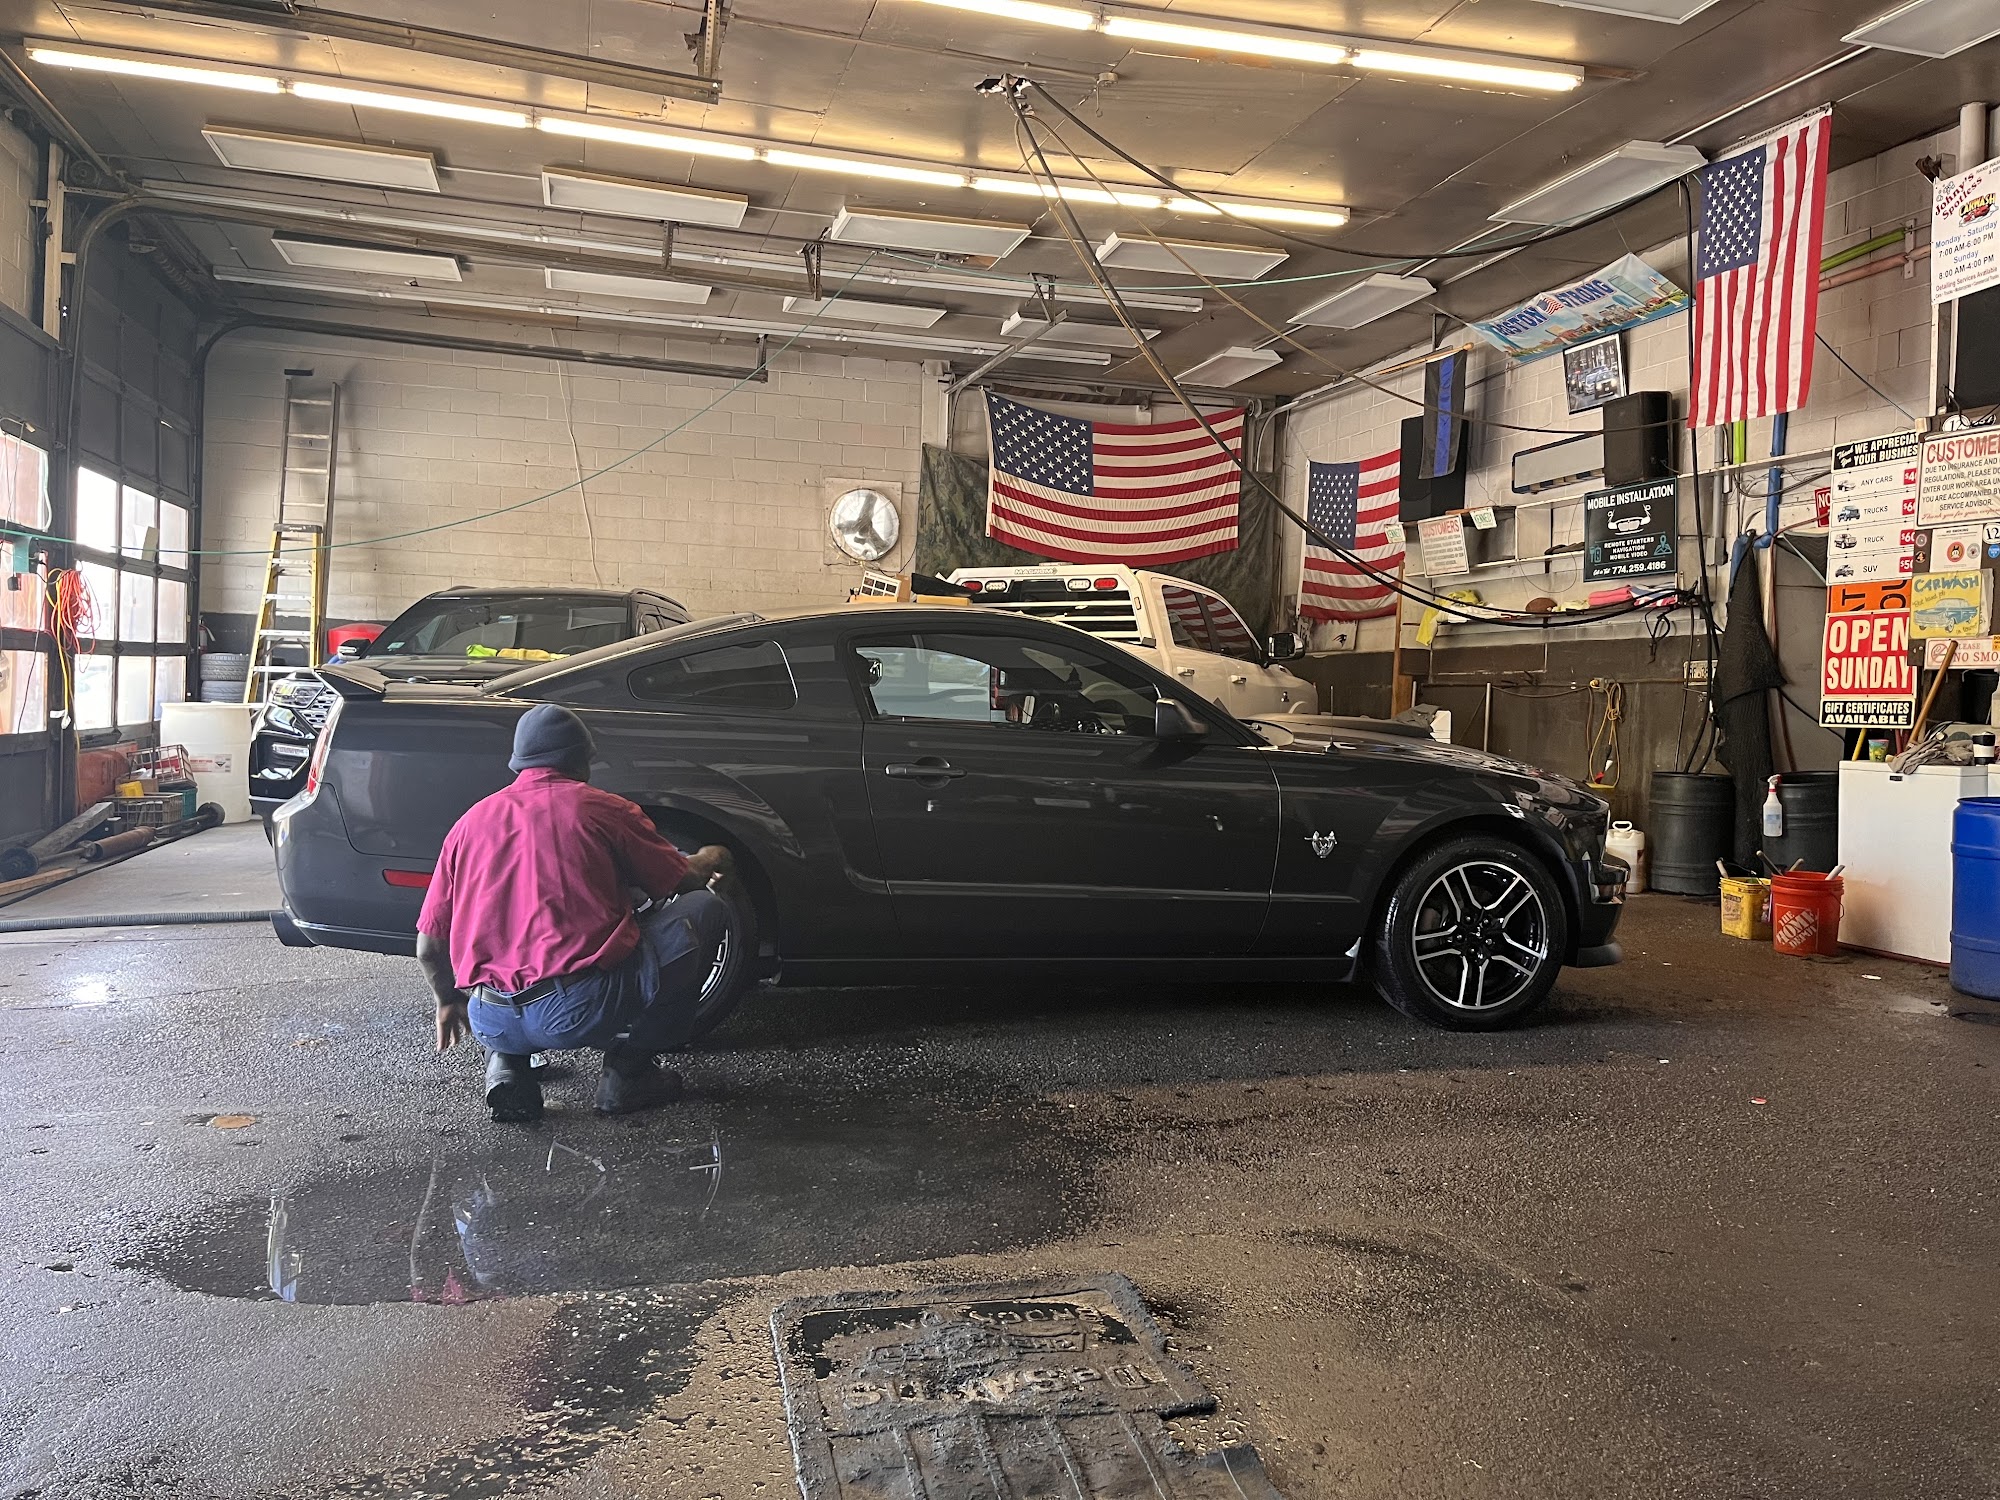 Johnny’s Spotless Carwash and Detailing